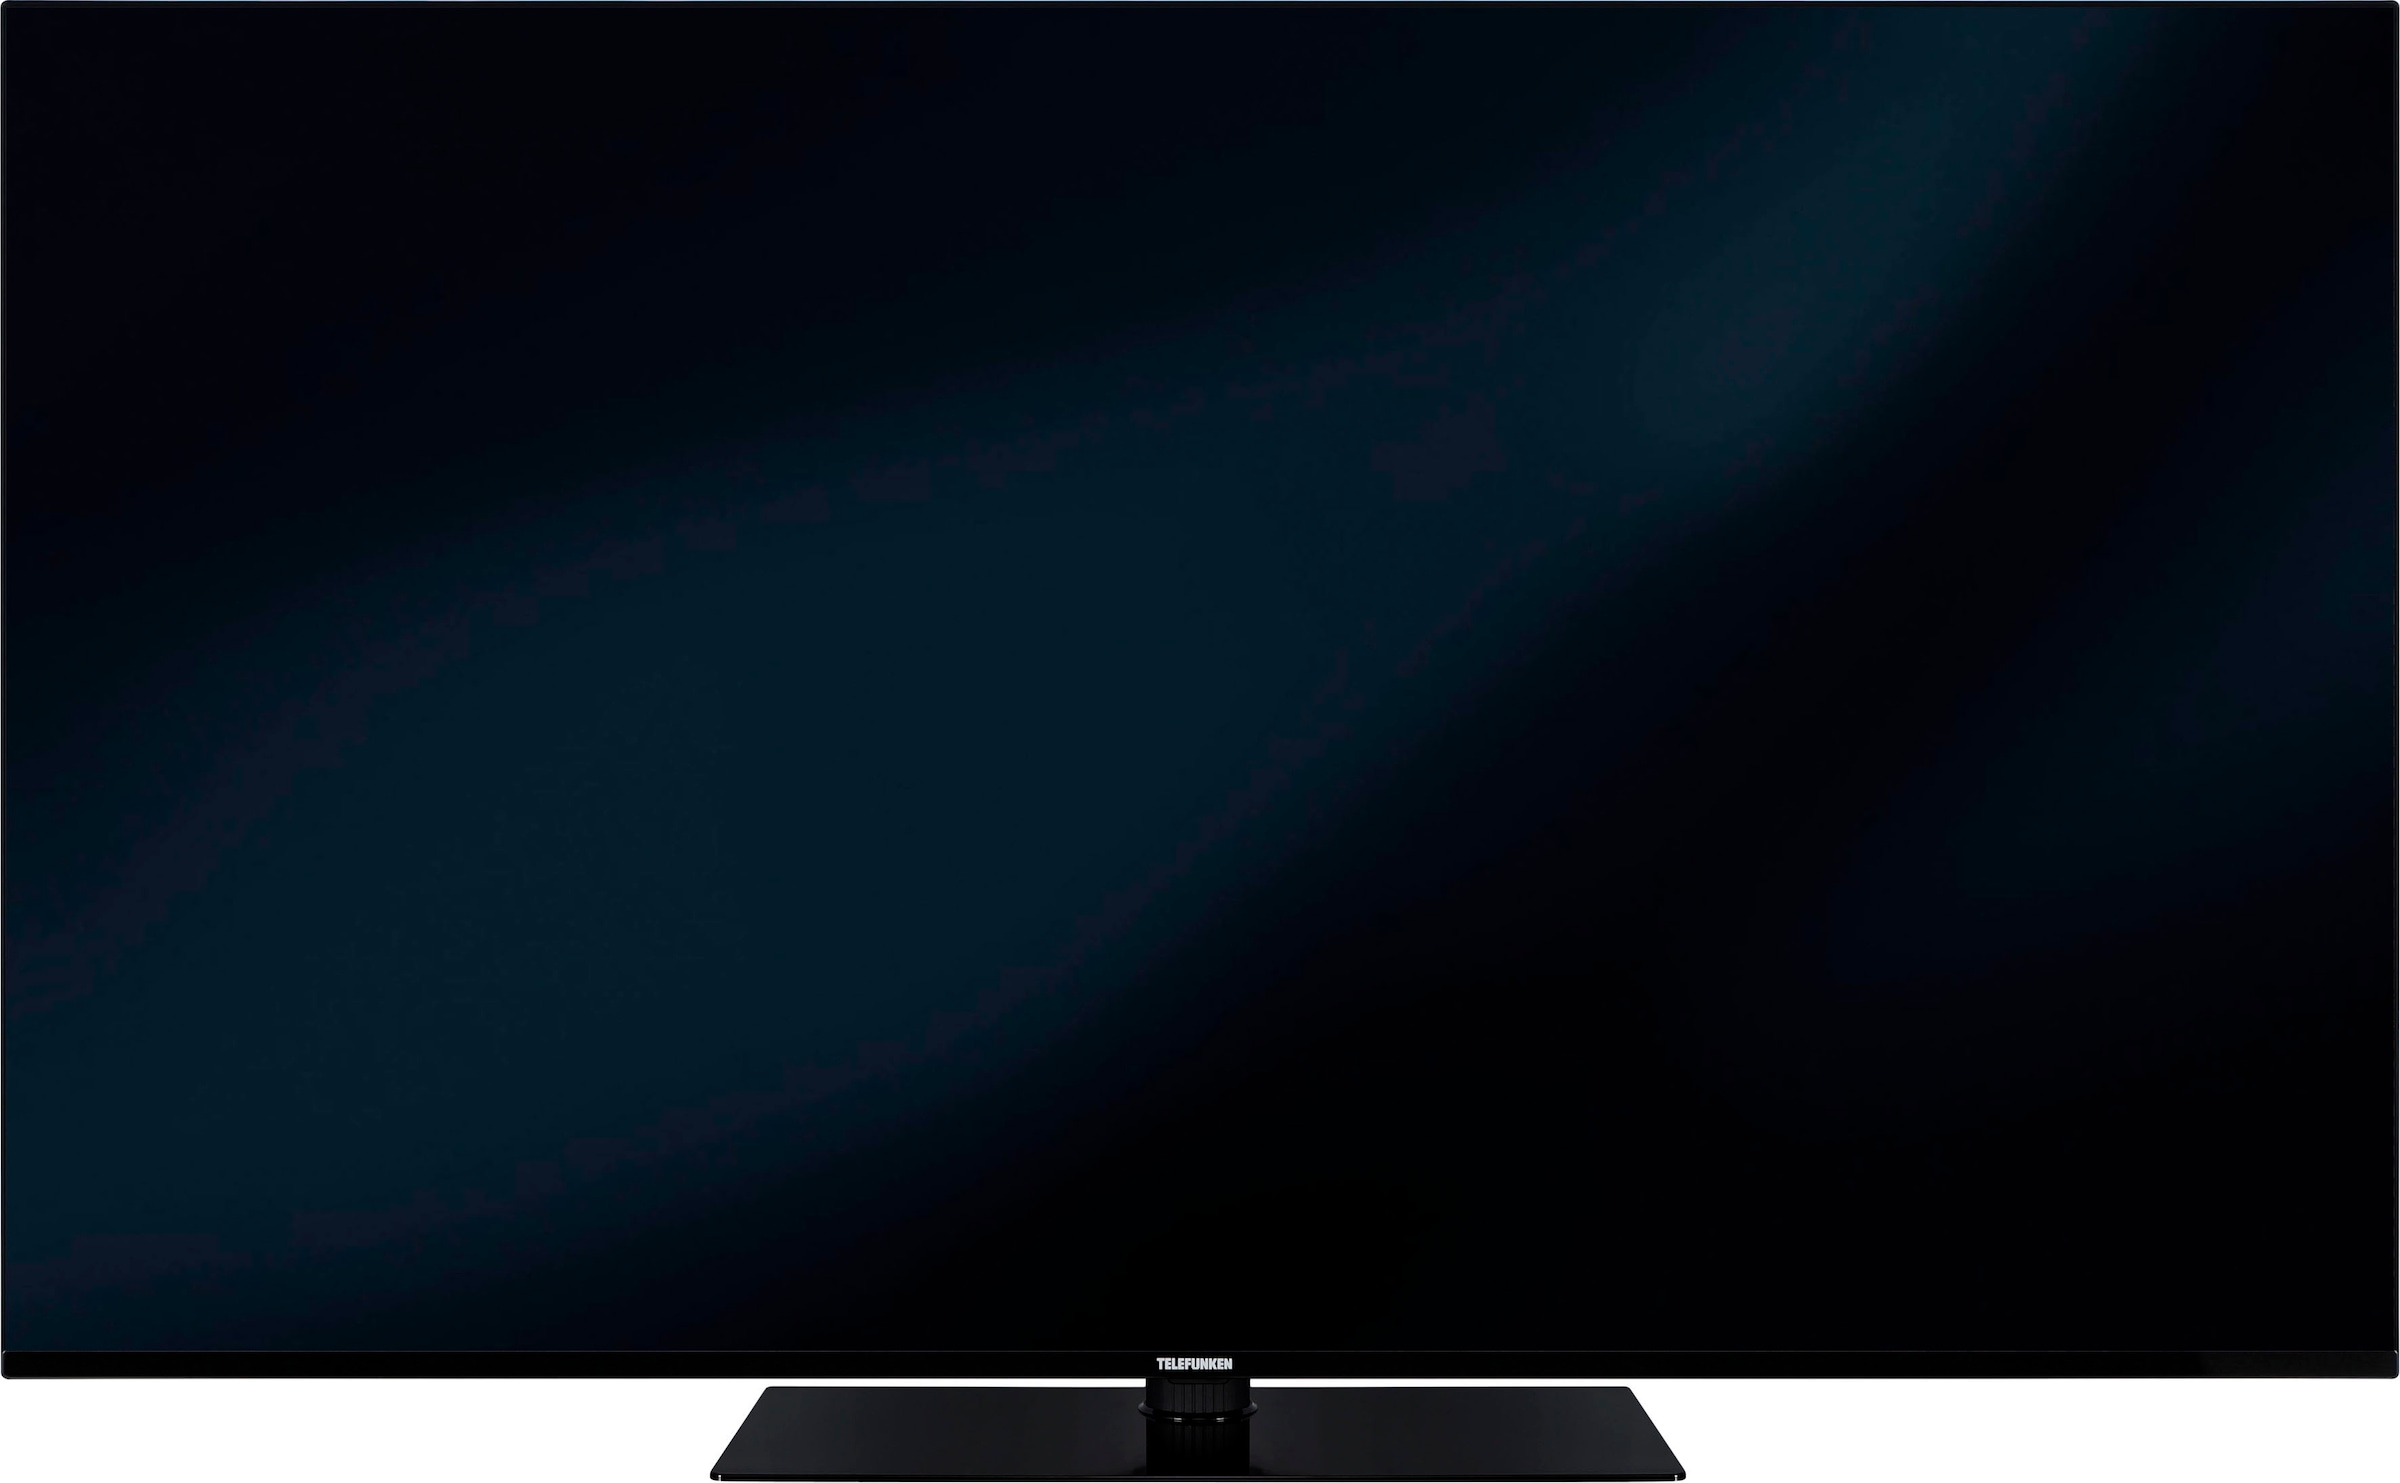 4K Telefunken auf kaufen cm/50 Zoll, 126 TV, Atmos,USB-Recording,Google »D50V950M2CWH«, TV-Android Ultra Smart- Rechnung LED-Fernseher Dolby HD, Assistent,Android-TV